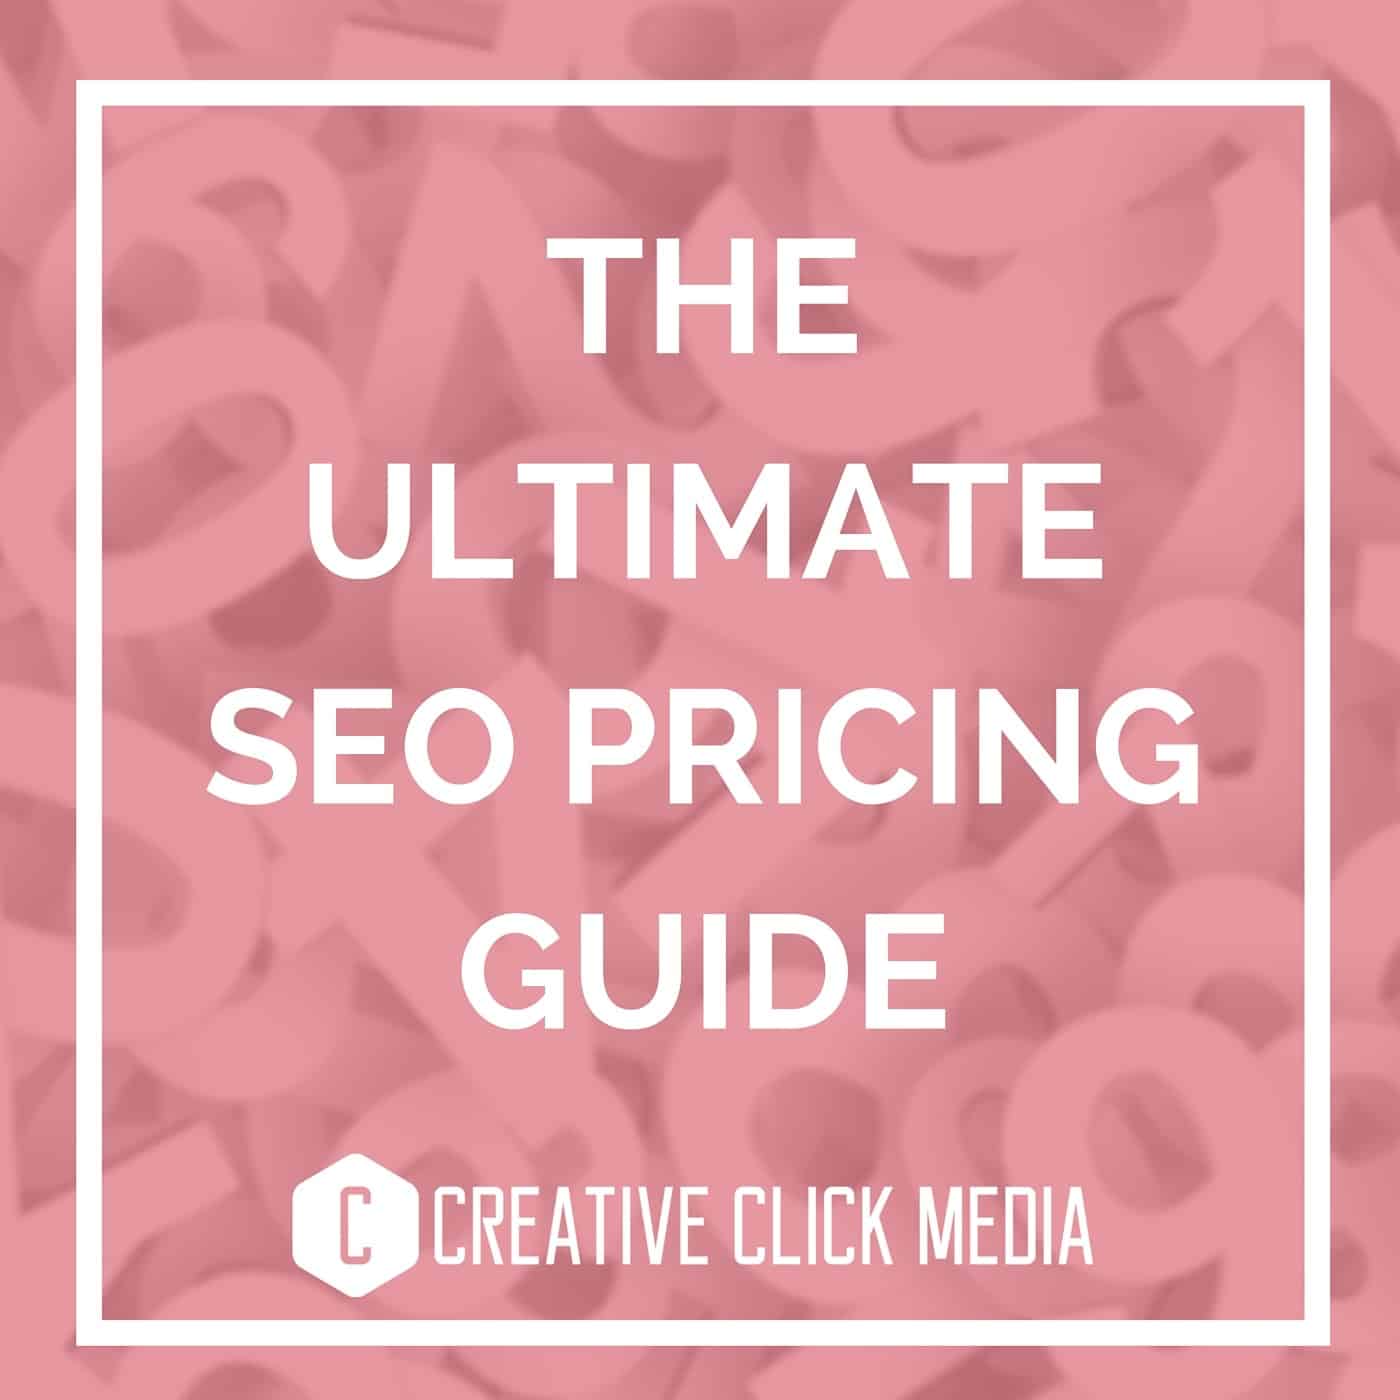 The Ultimate SEO Pricing Guide: How Much Should You Pay?